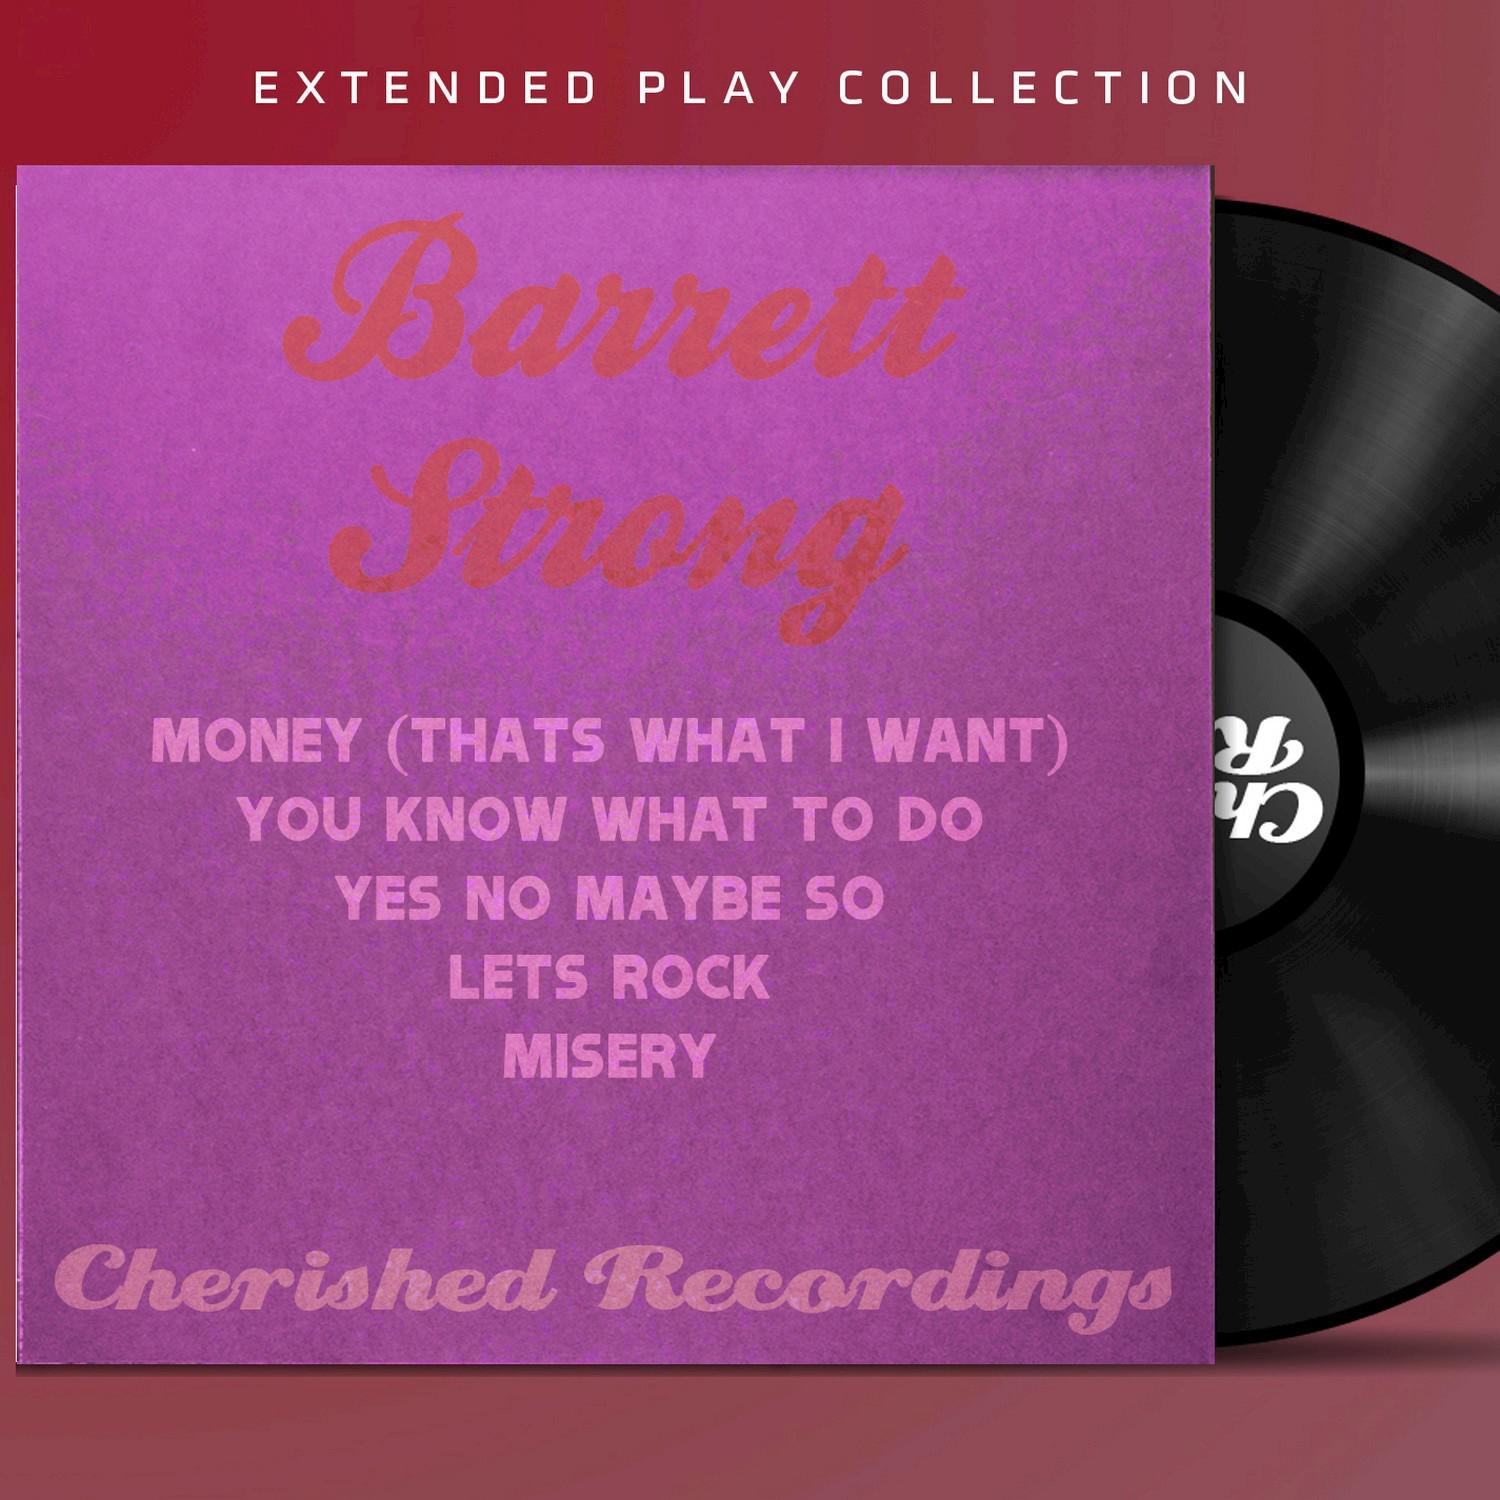 Barrett Strong: The Extended Play Collection